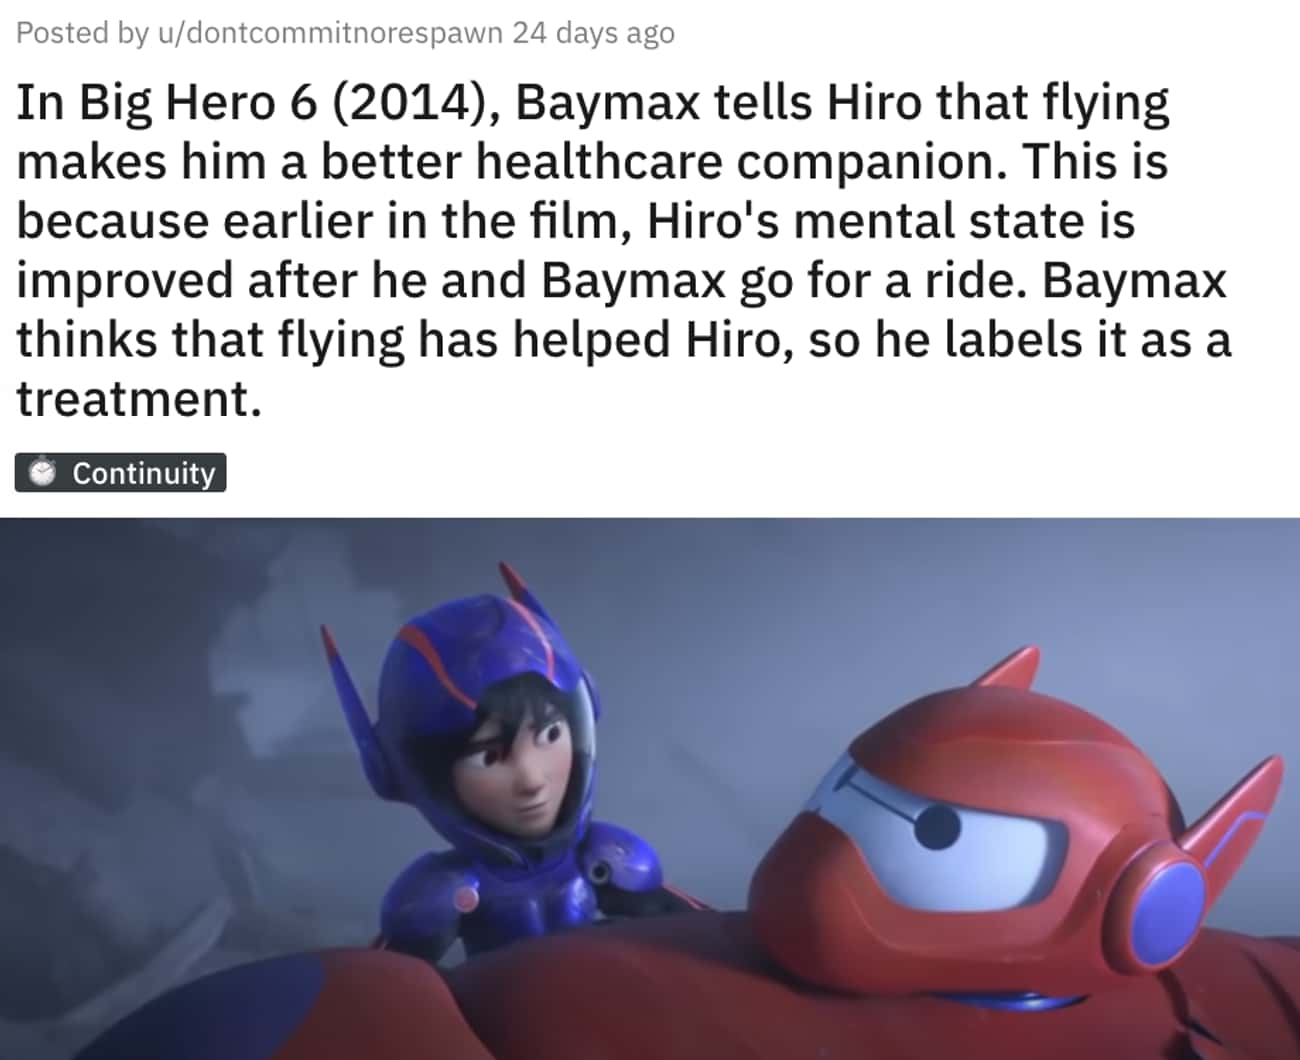 Baymax Considers Flying A Treatment For Hiro